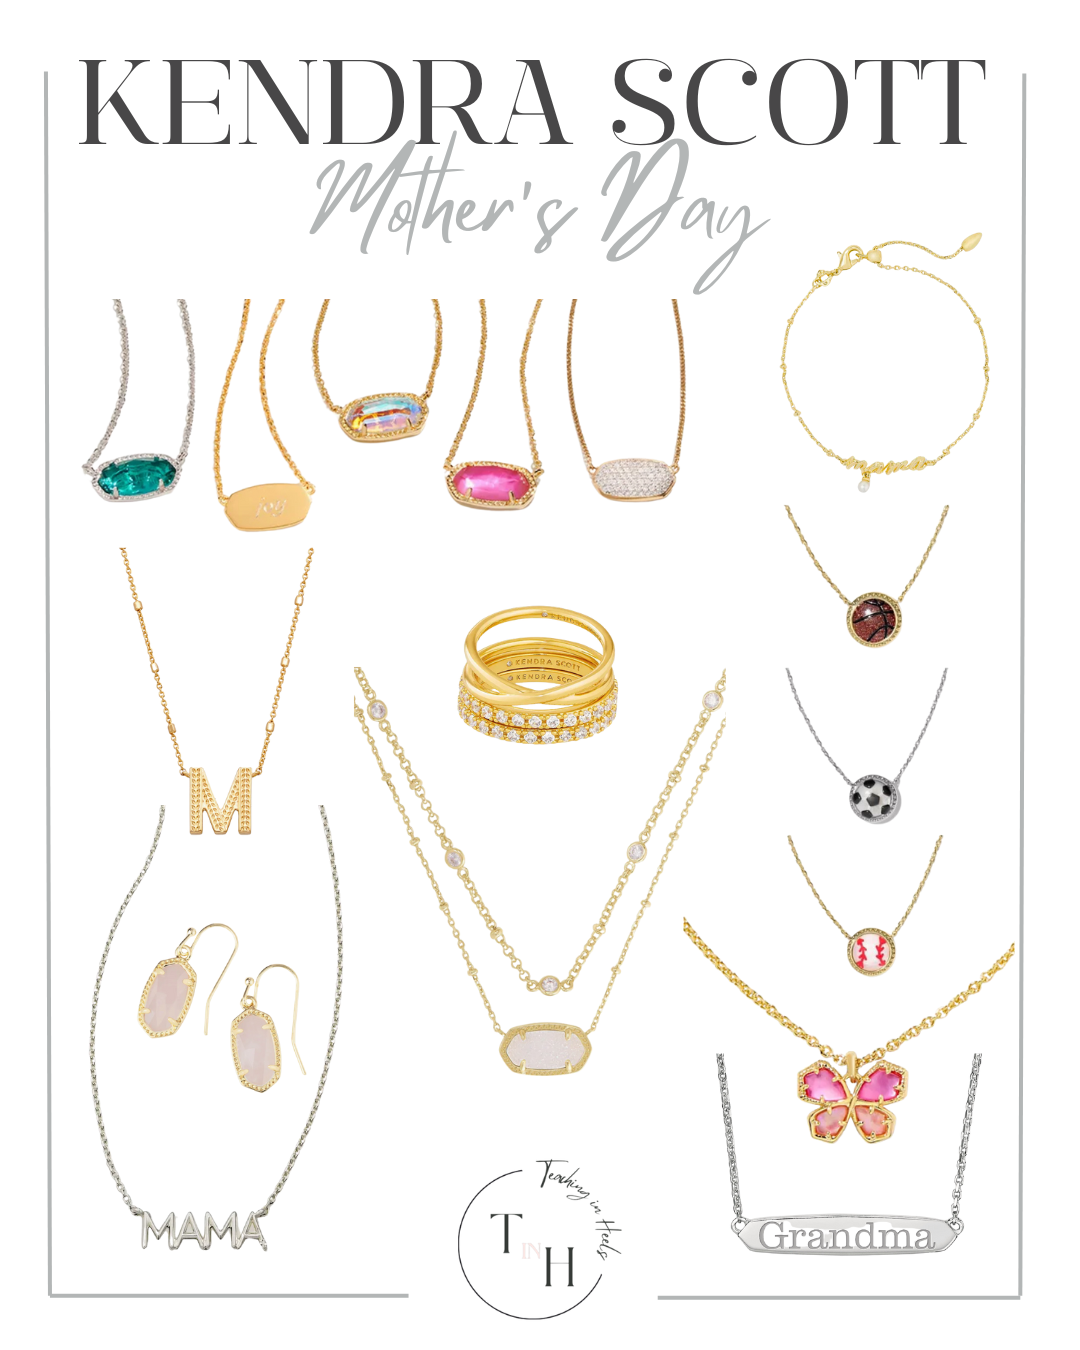 10 Heartwarming Mother's Day Gift Ideas to Show Your Love

mother's day, mother's gifts, mom gifts, gift guide, jewelry, accessories, necklaces